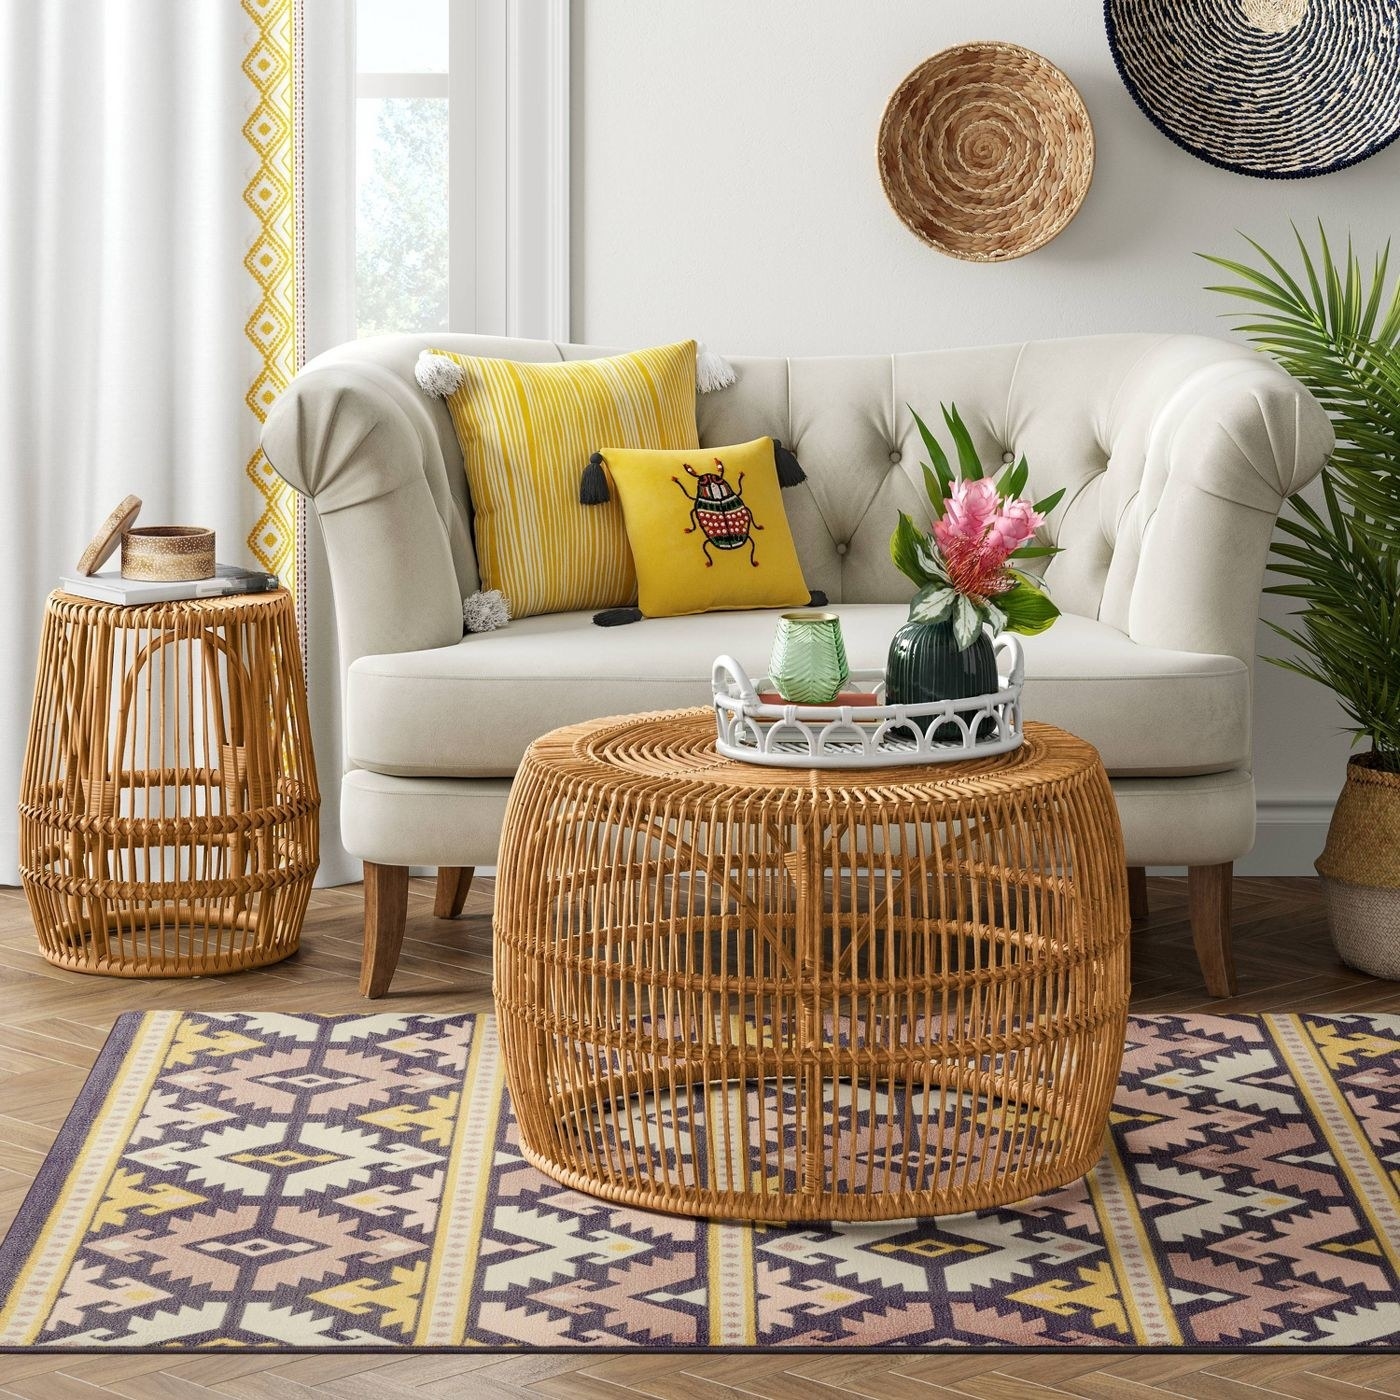 A round rattan coffee table with a tray on it